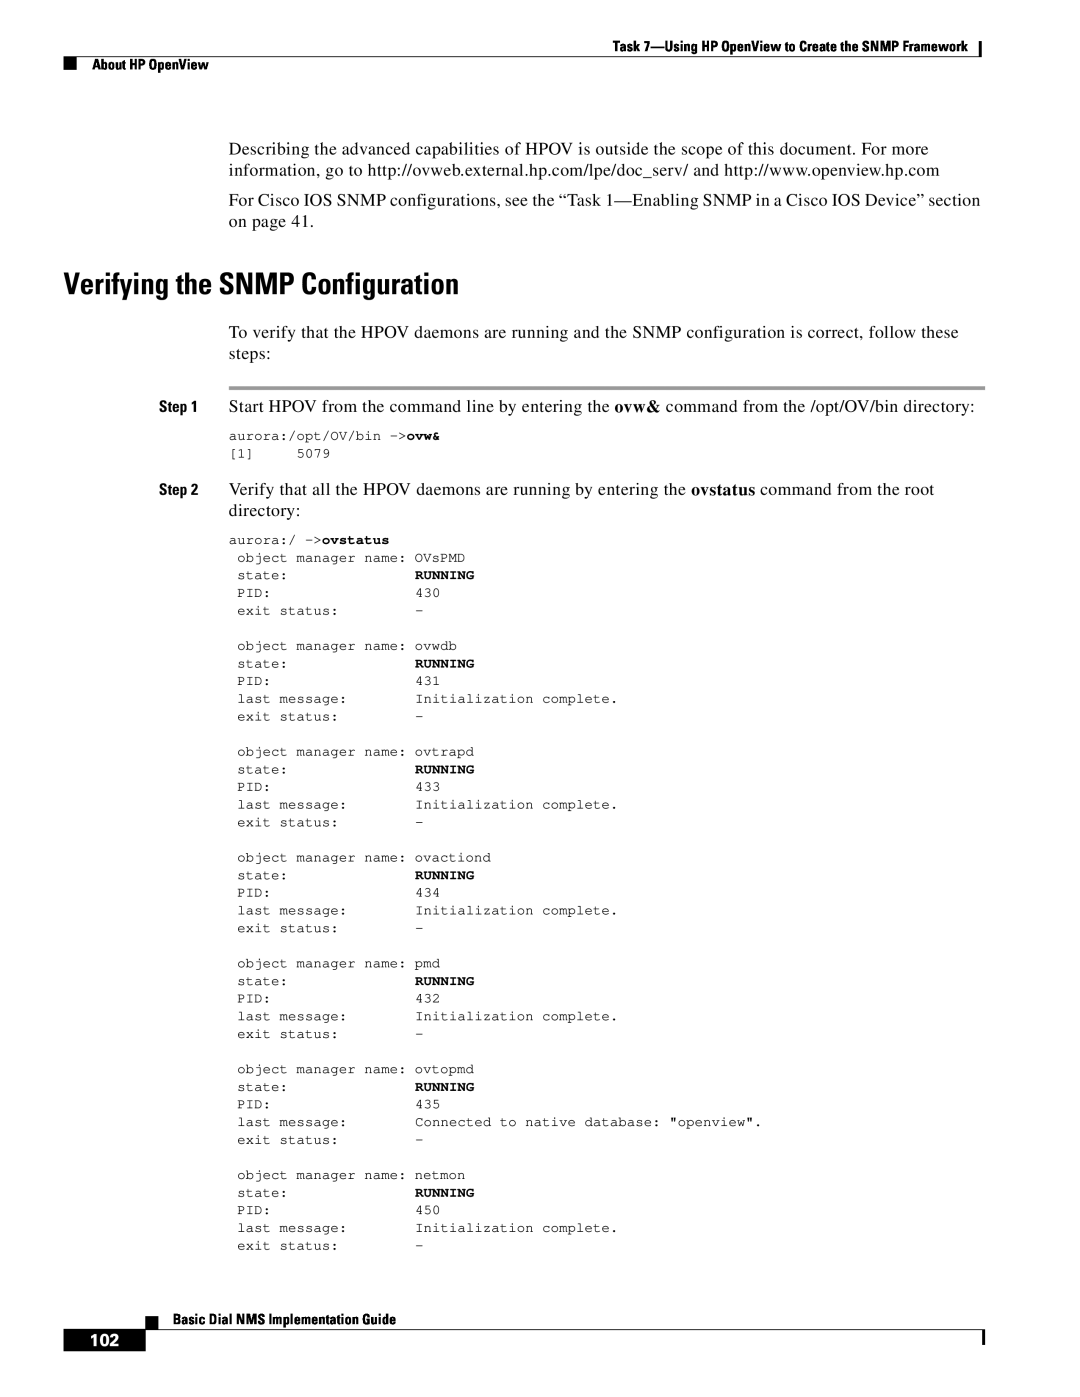 Cisco Systems Dial NMS manual Verifying the SNMP Configuration, Connected to native database openview 